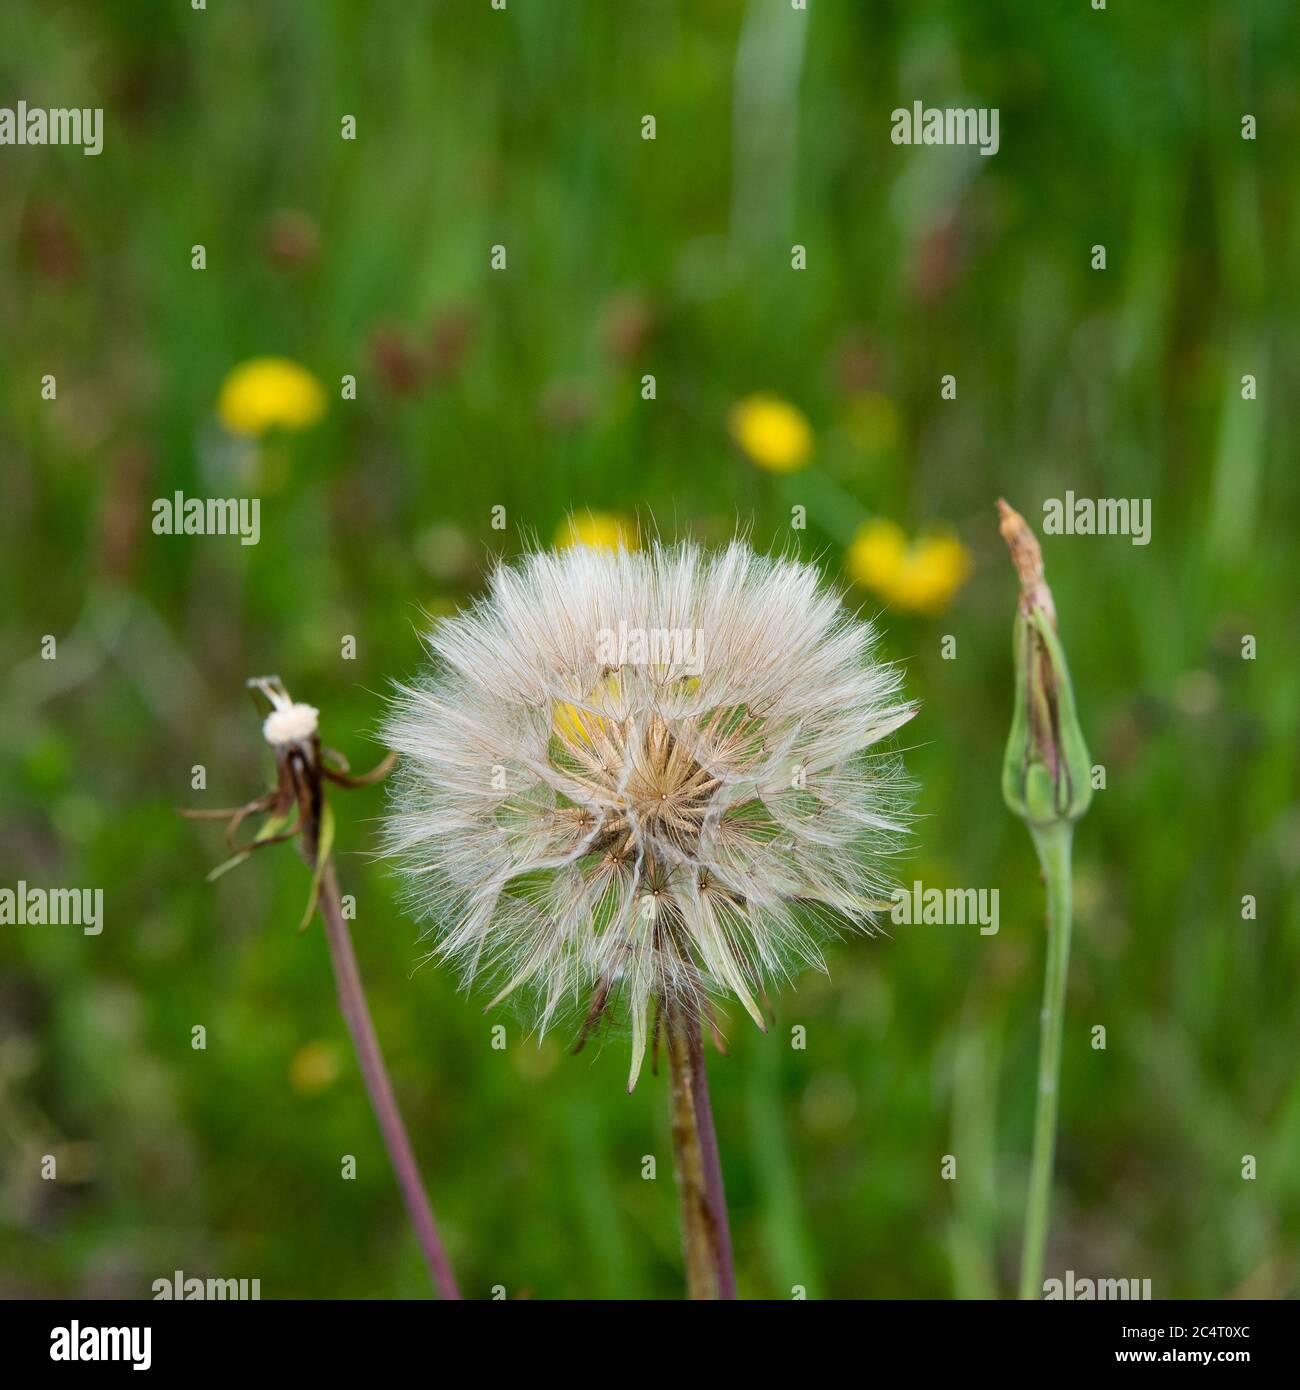 Salsify, or goatsbeard, seed globe with flower bud and stem, a flowering plant in the sunflower family, growing in a patch of weeds. Stock Photo